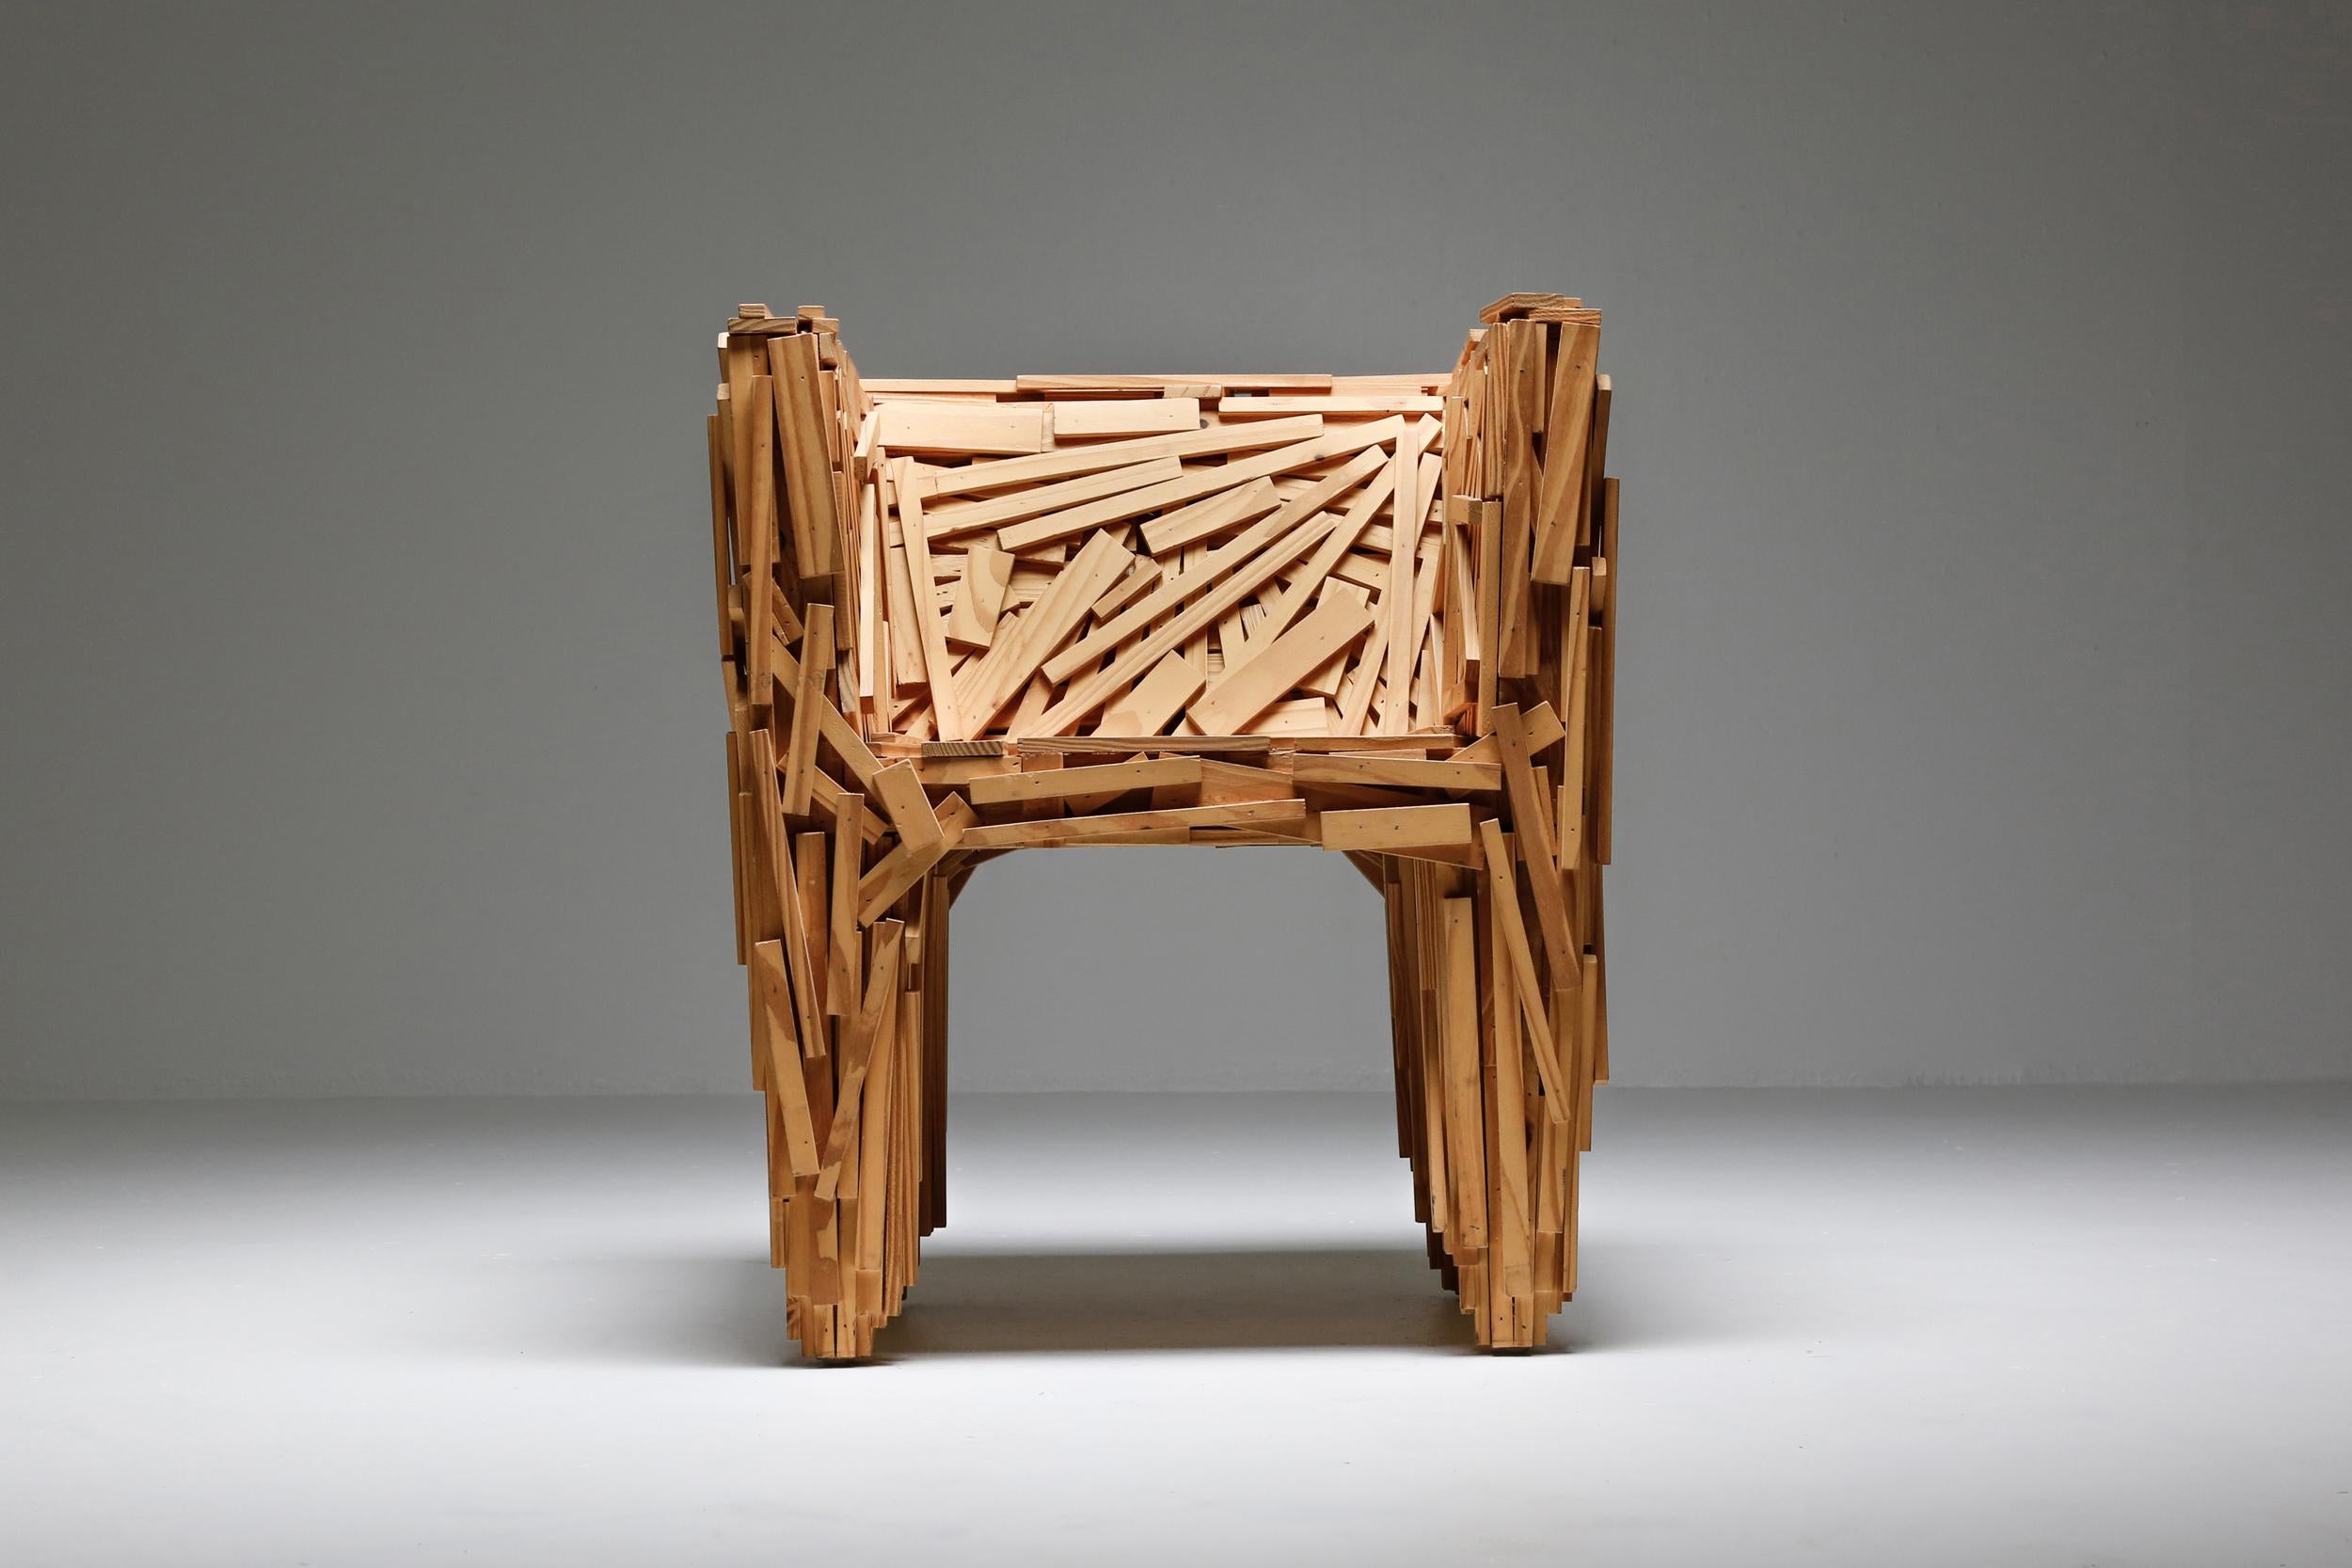 Estudio Campana, Edra, Favela chair, Italy,

Without any internal frame, Favela is made with many strips of natural wood,
Pine for indoor use, teak also for outdoor. In both cases, the strips are nailed one over the other by hand, in a random